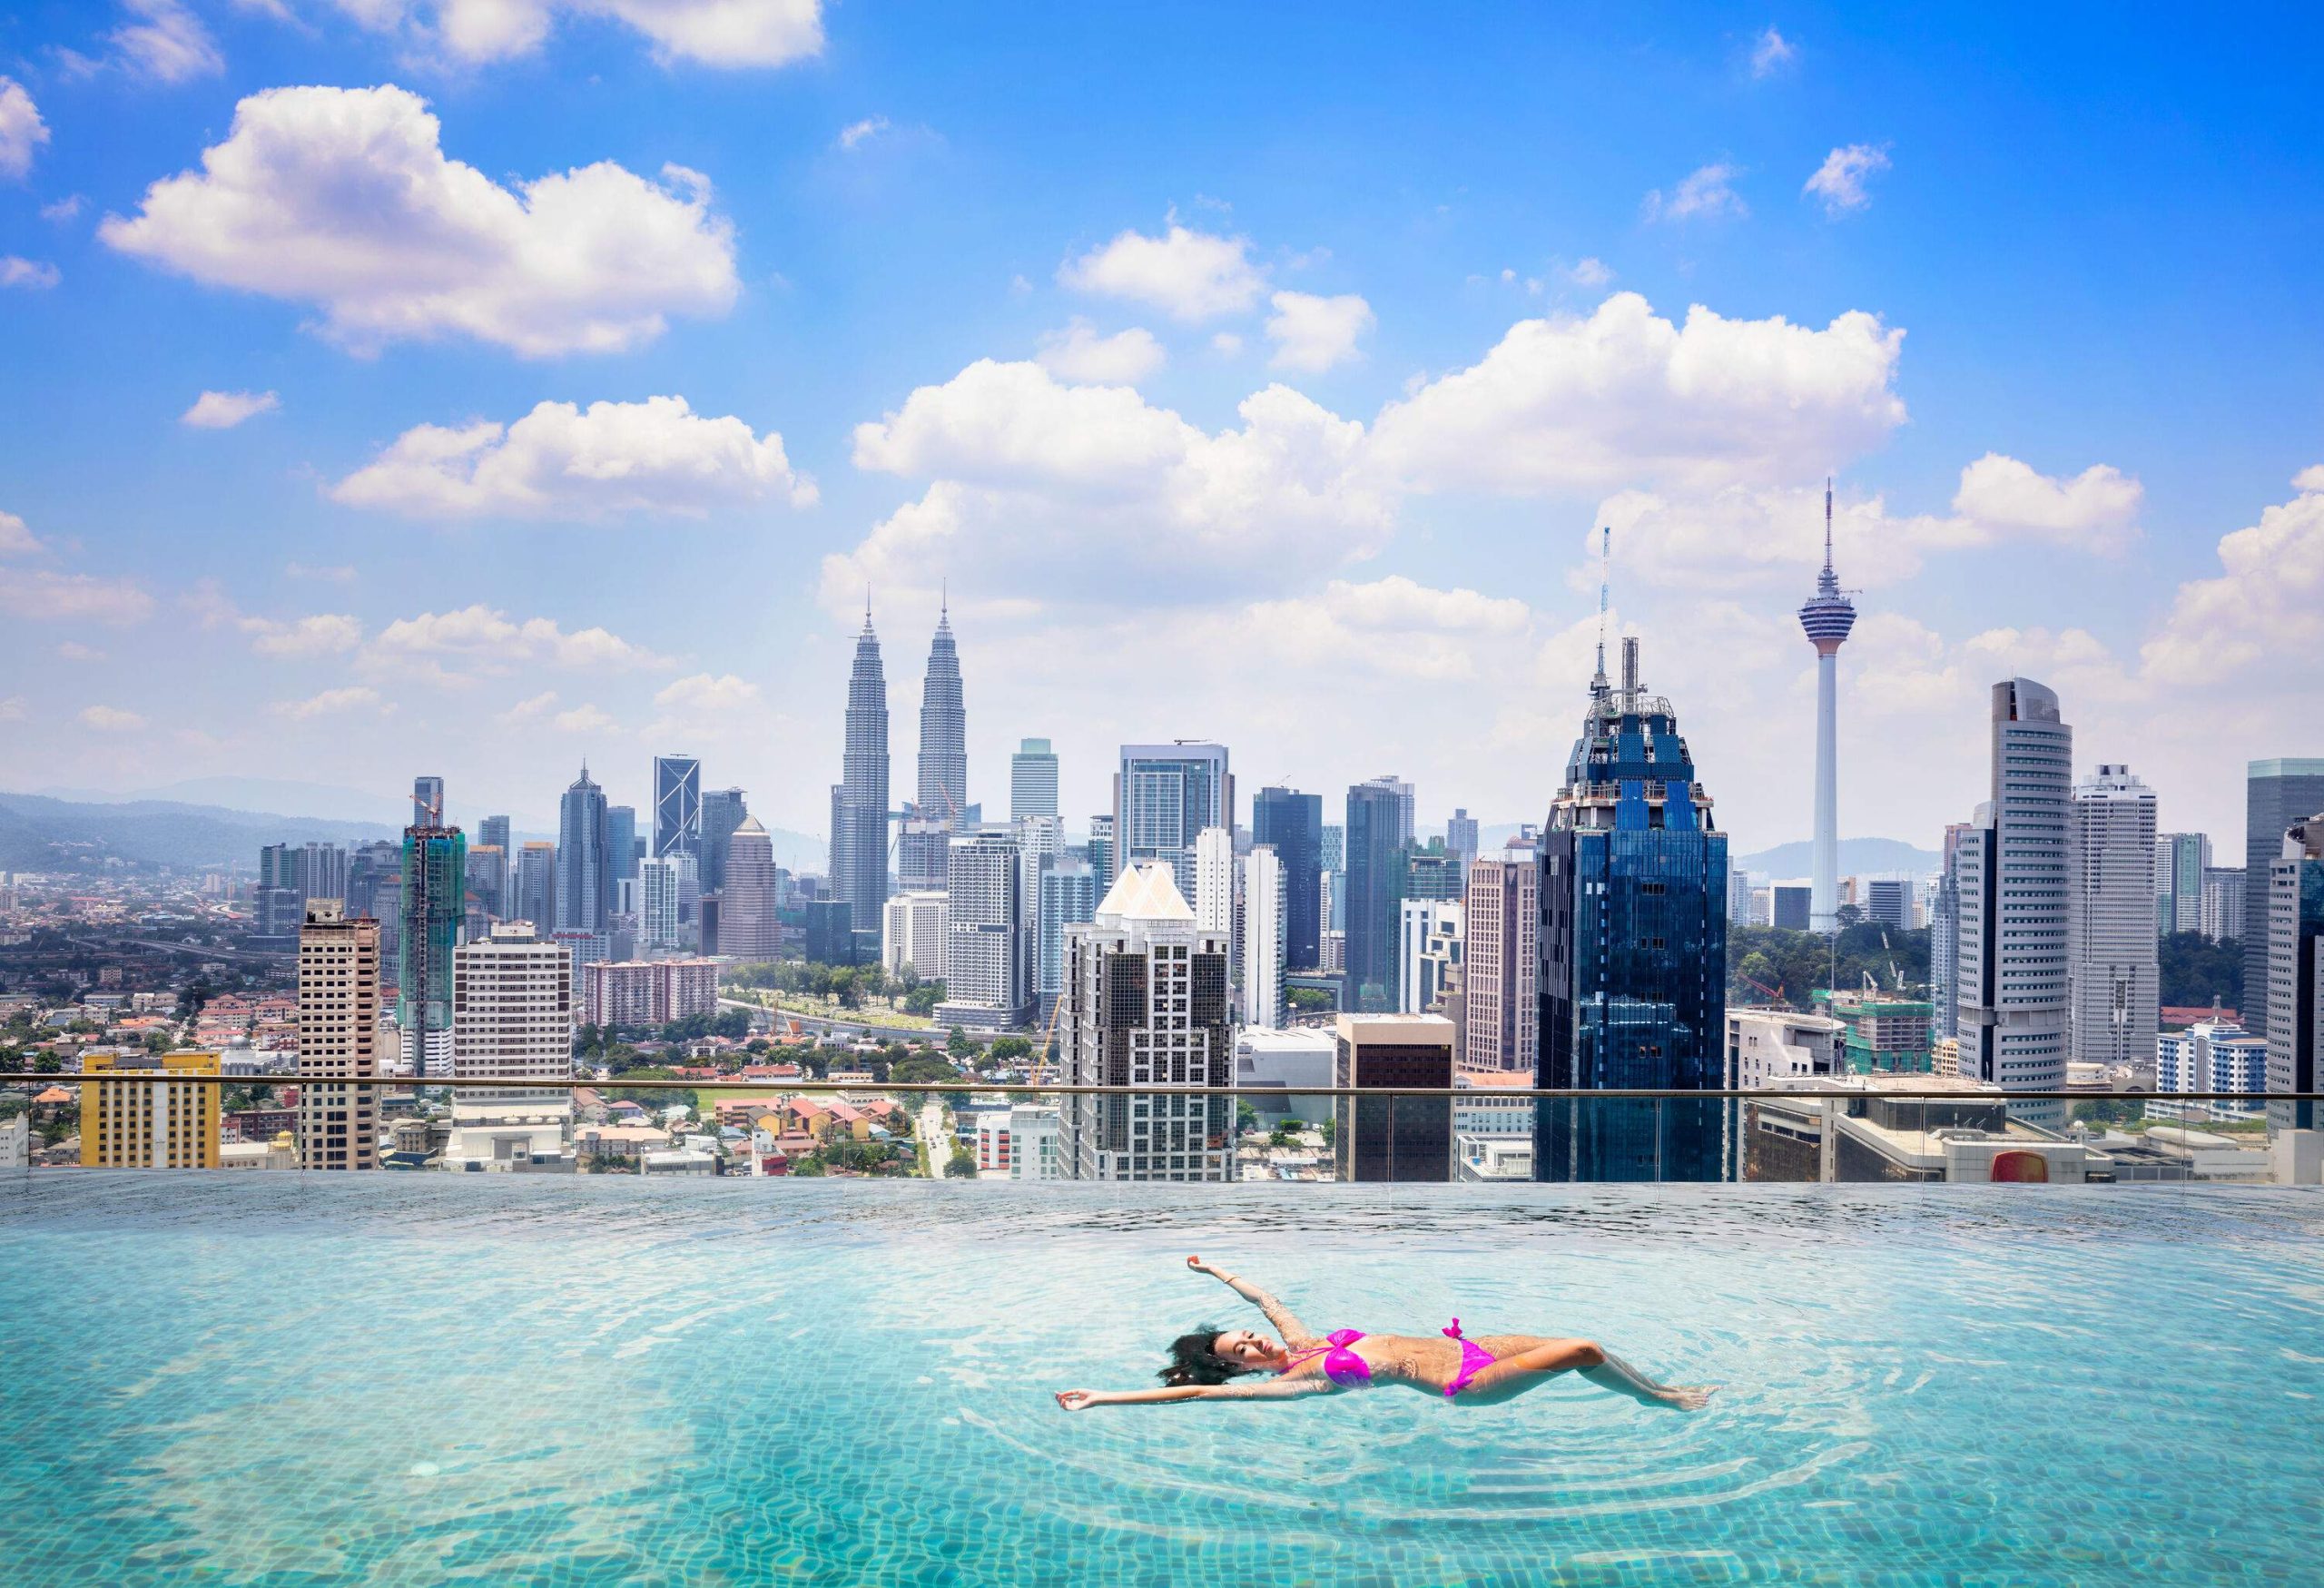 A woman in pink swimwear floats in an infinity swimming pool with a view of modern towering buildings under the cloudy blue sky.